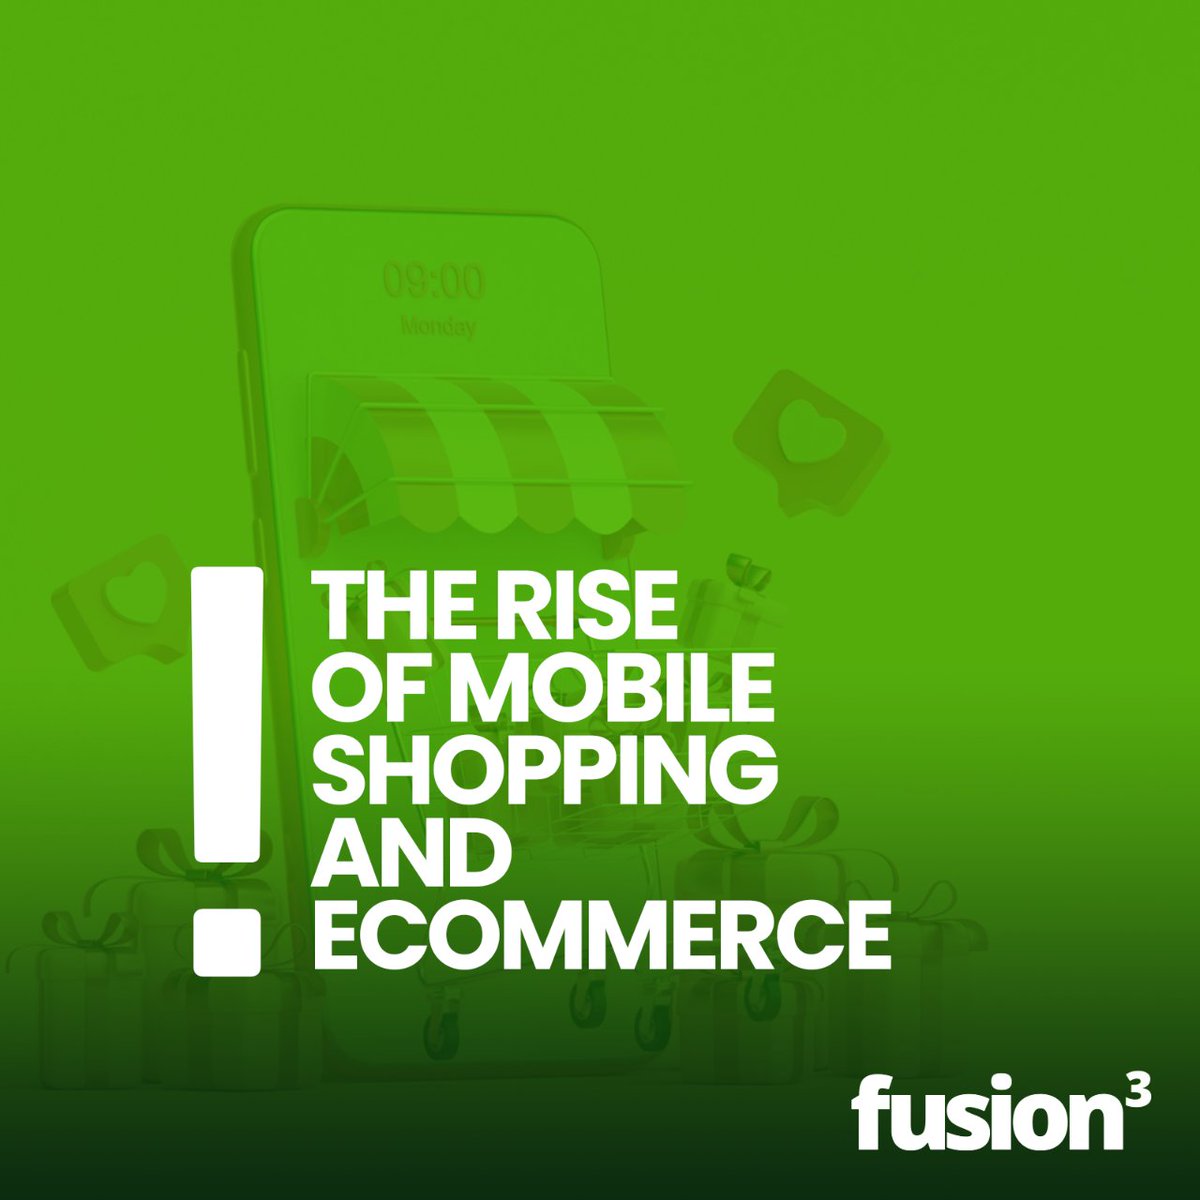 🛒↗️ The Rise of Mobile Shopping and Ecommerce 📱Is your website mobile-friendly? 🛒 💡 Tip: Optimise your website for mobile browsing and purchasing. 💥 Action: Implement easy navigation and quick check-out options for mobile users. #MobileShopping #OnlineBusiness #Ecommerce